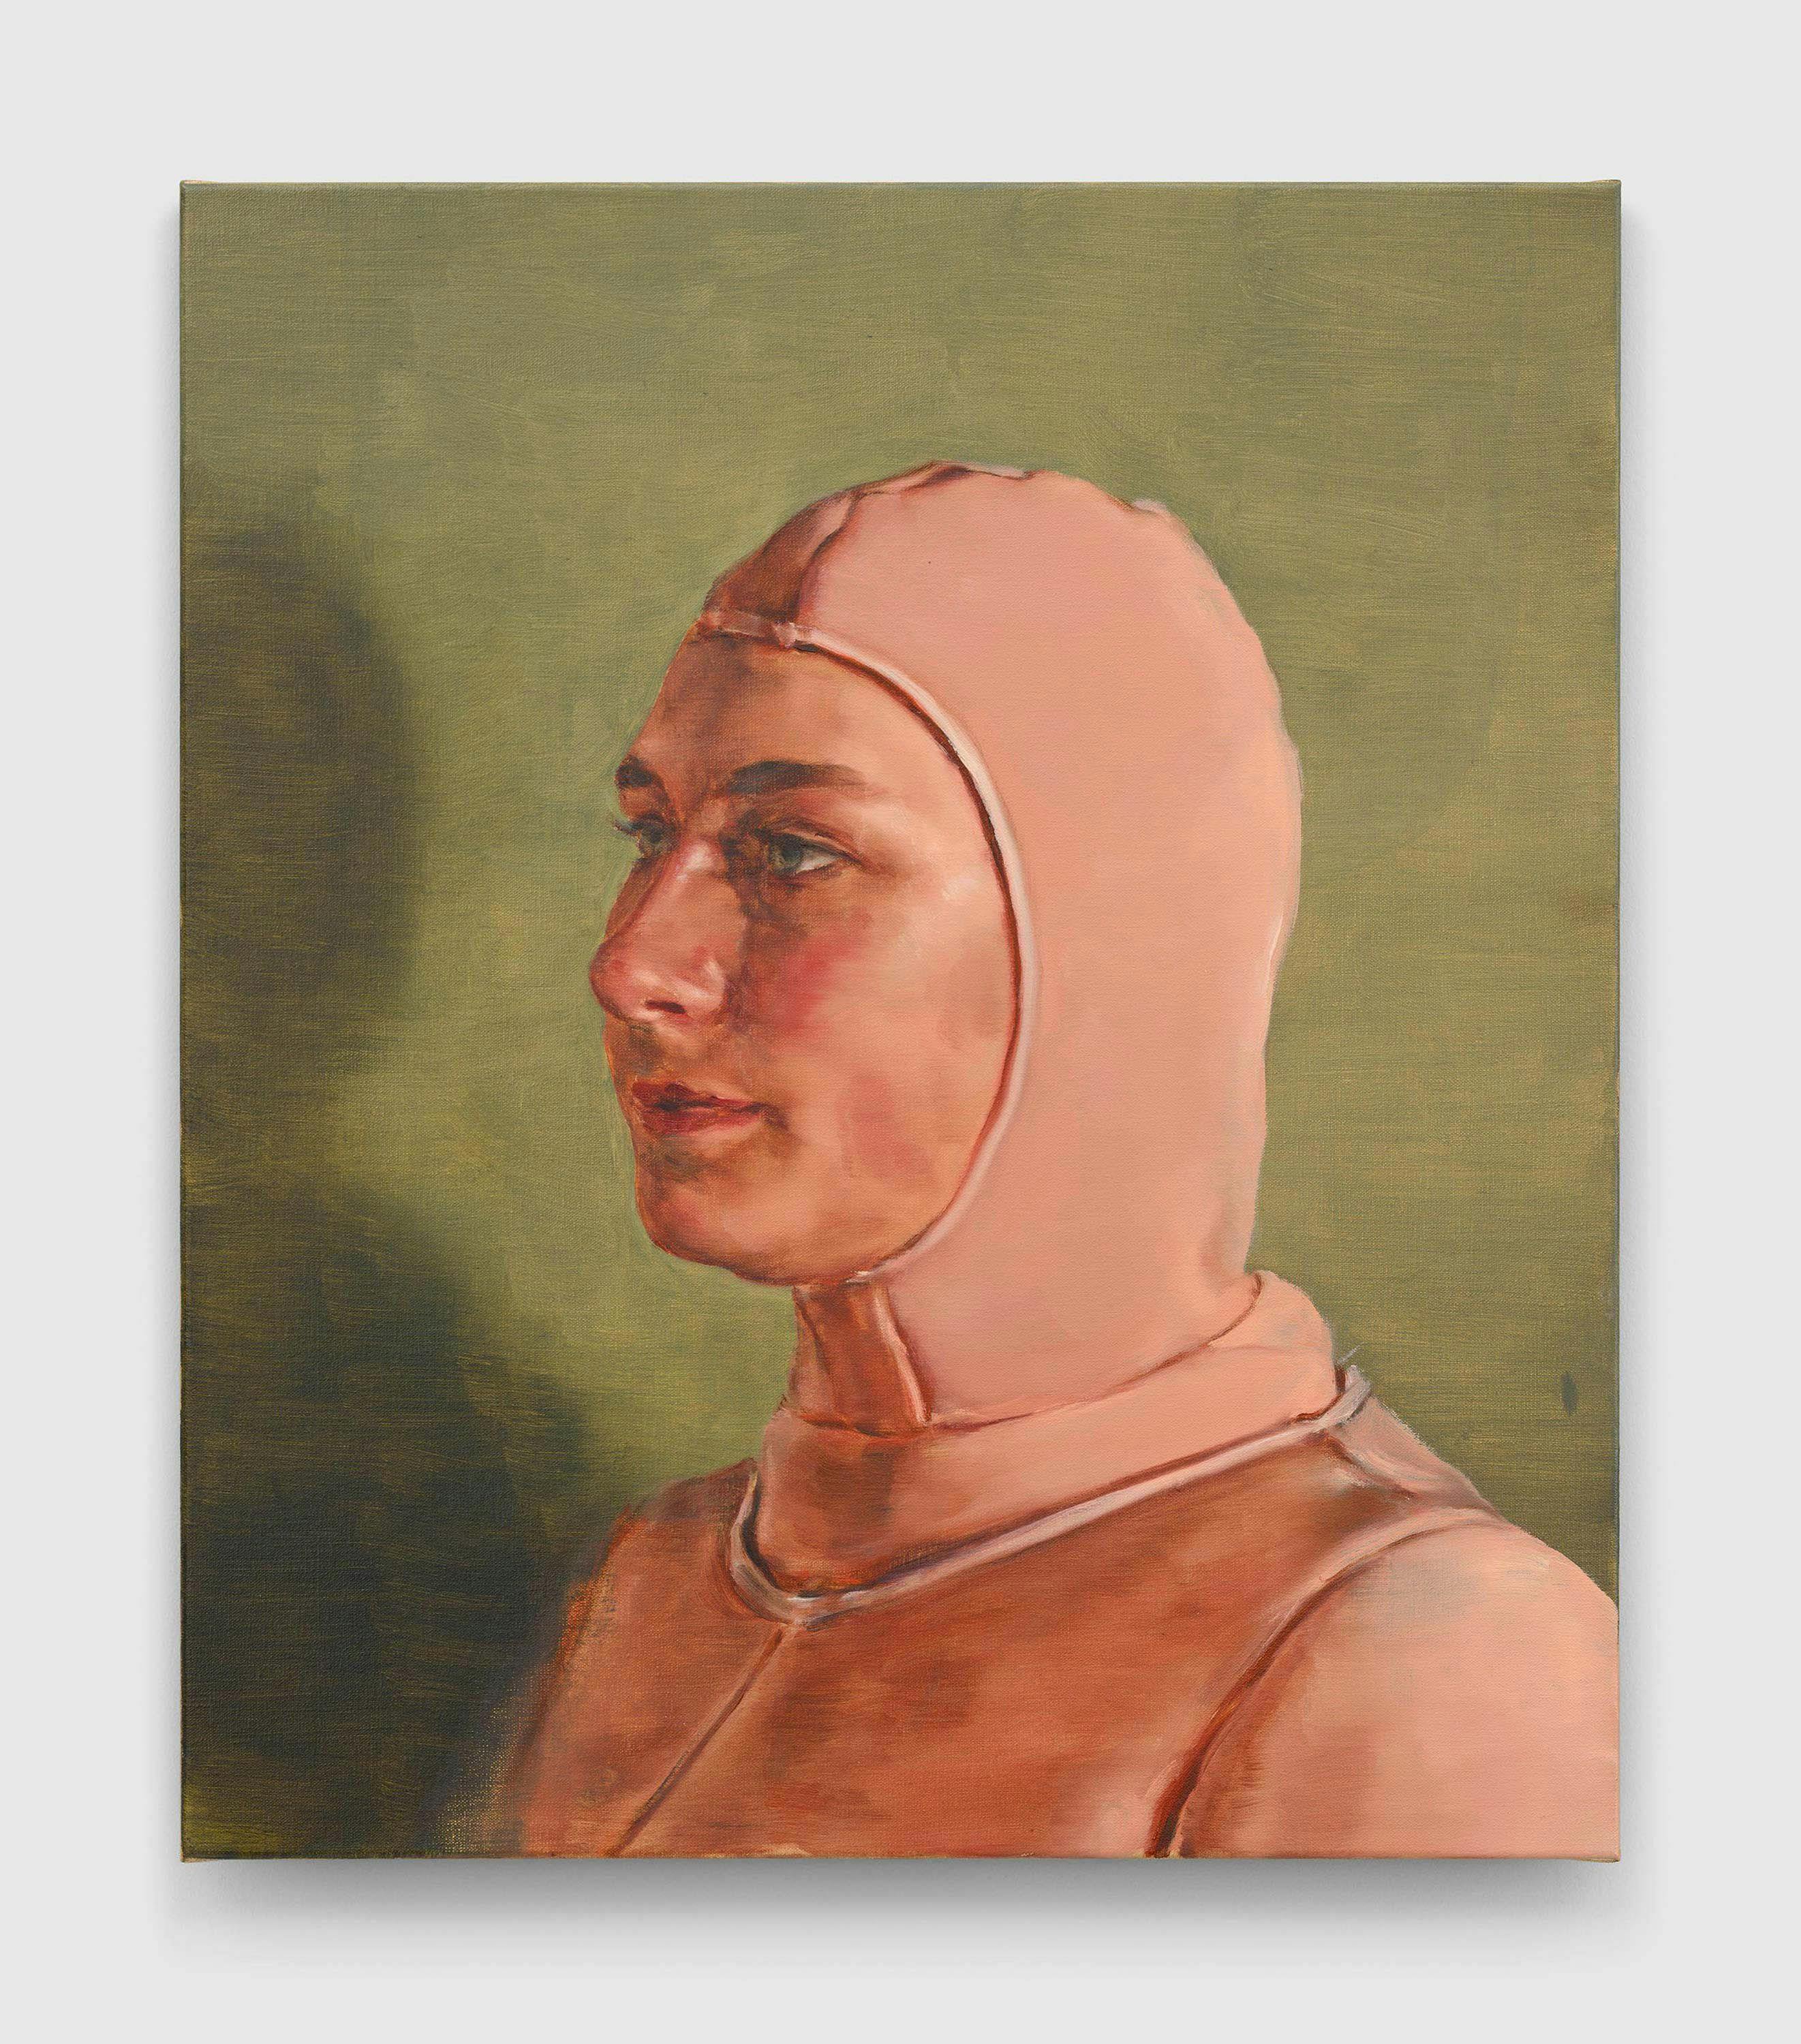 A painting by Michaël Borremans, titled The Acrobat, dated 2021.